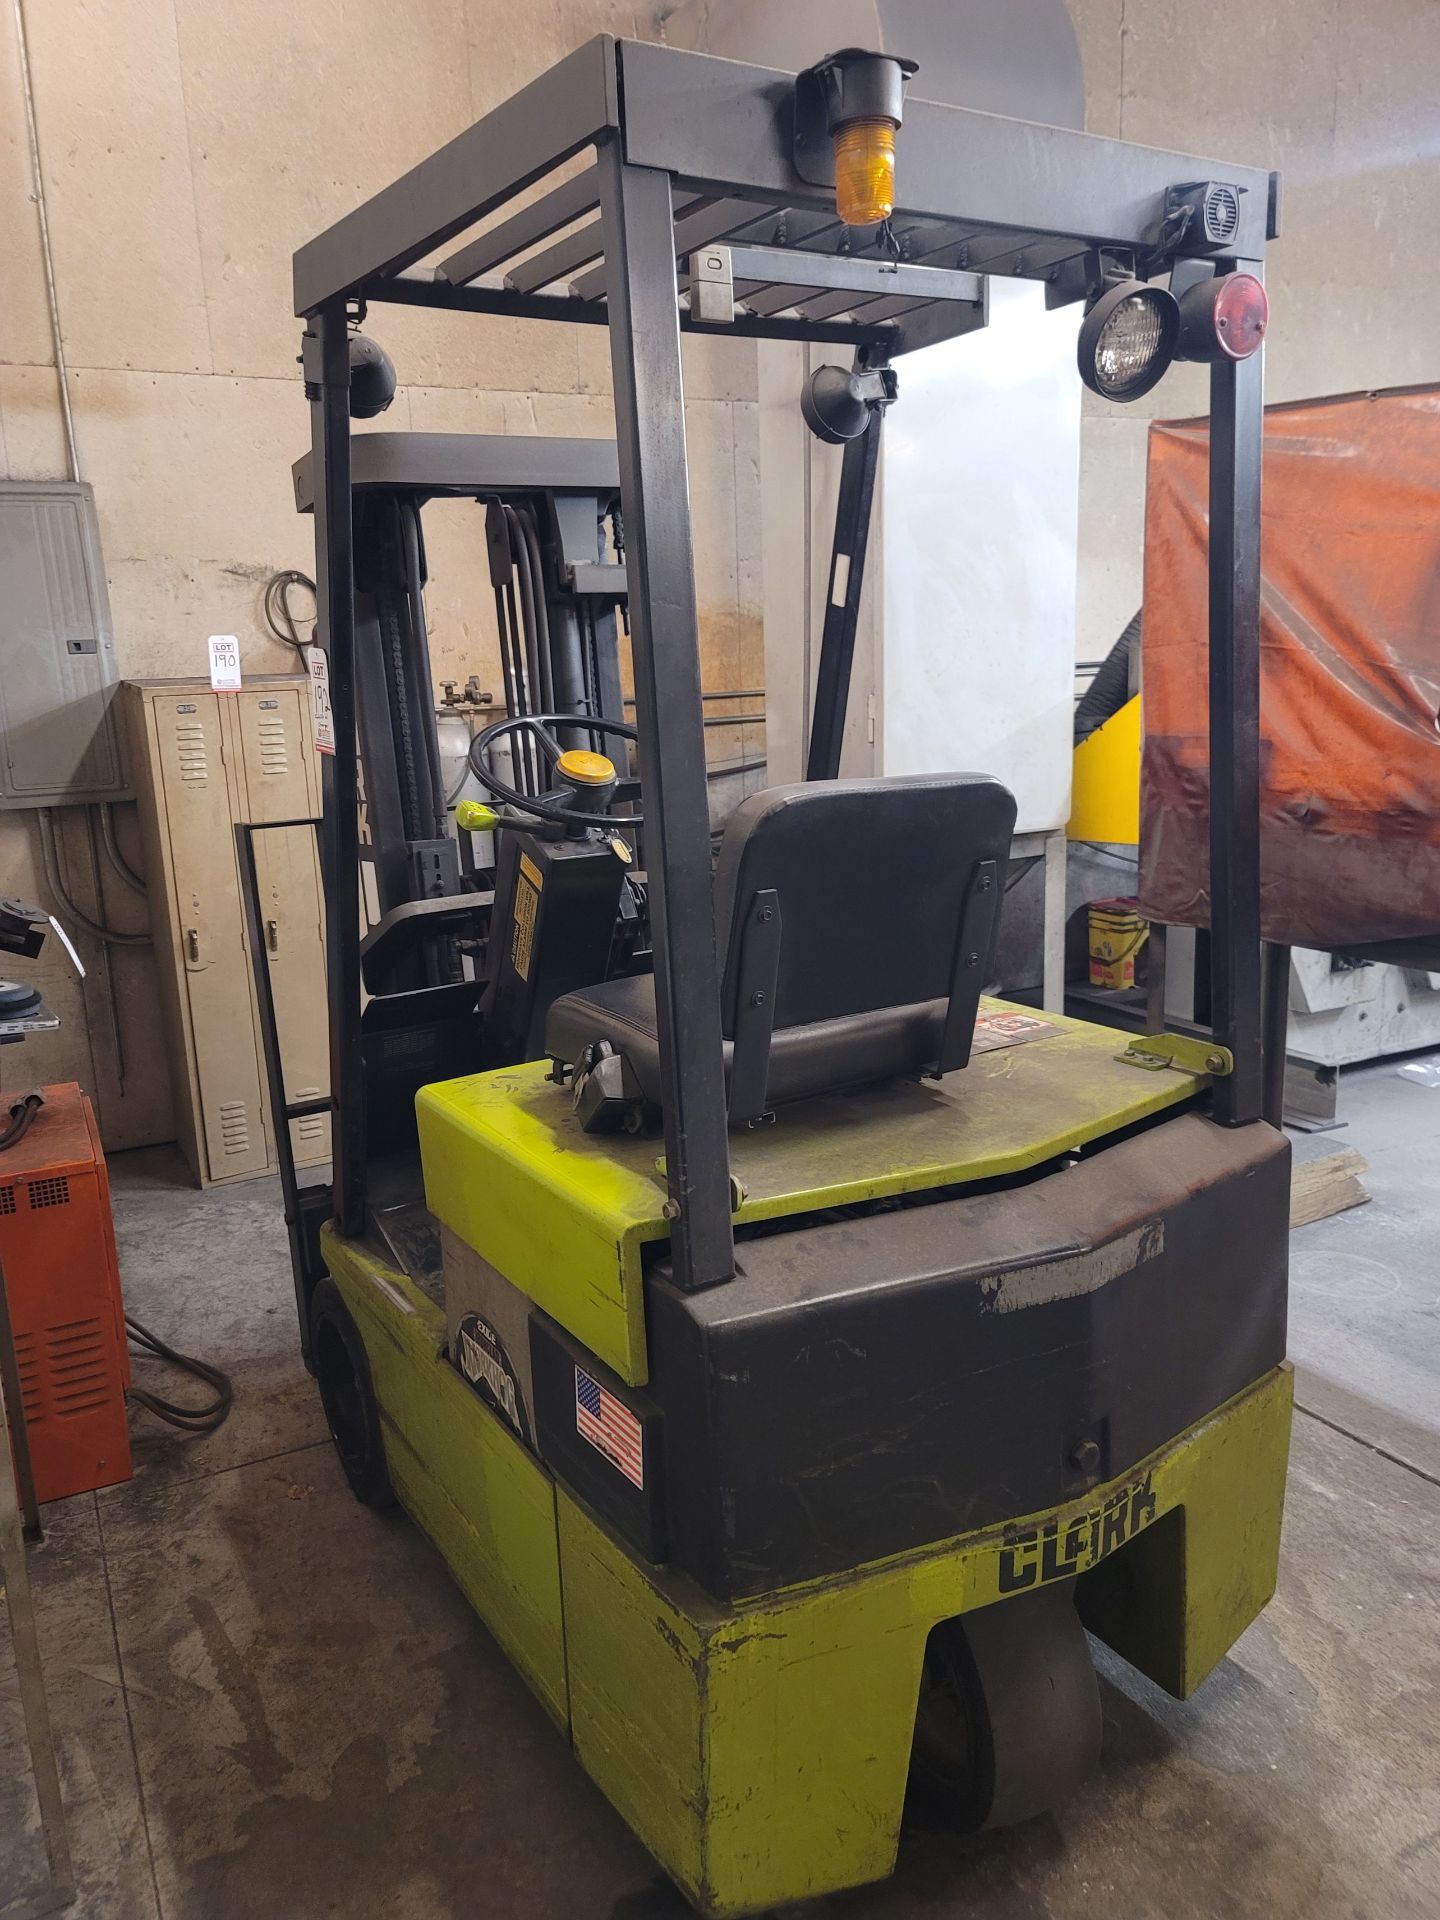 CLARK TM15S ELECTRIC FORKLIFT, 3,000 LB CAPACITY, 3-STAGE MAST, SIDE SHIFT, 188" LIFT HEIGHT, - Image 5 of 8